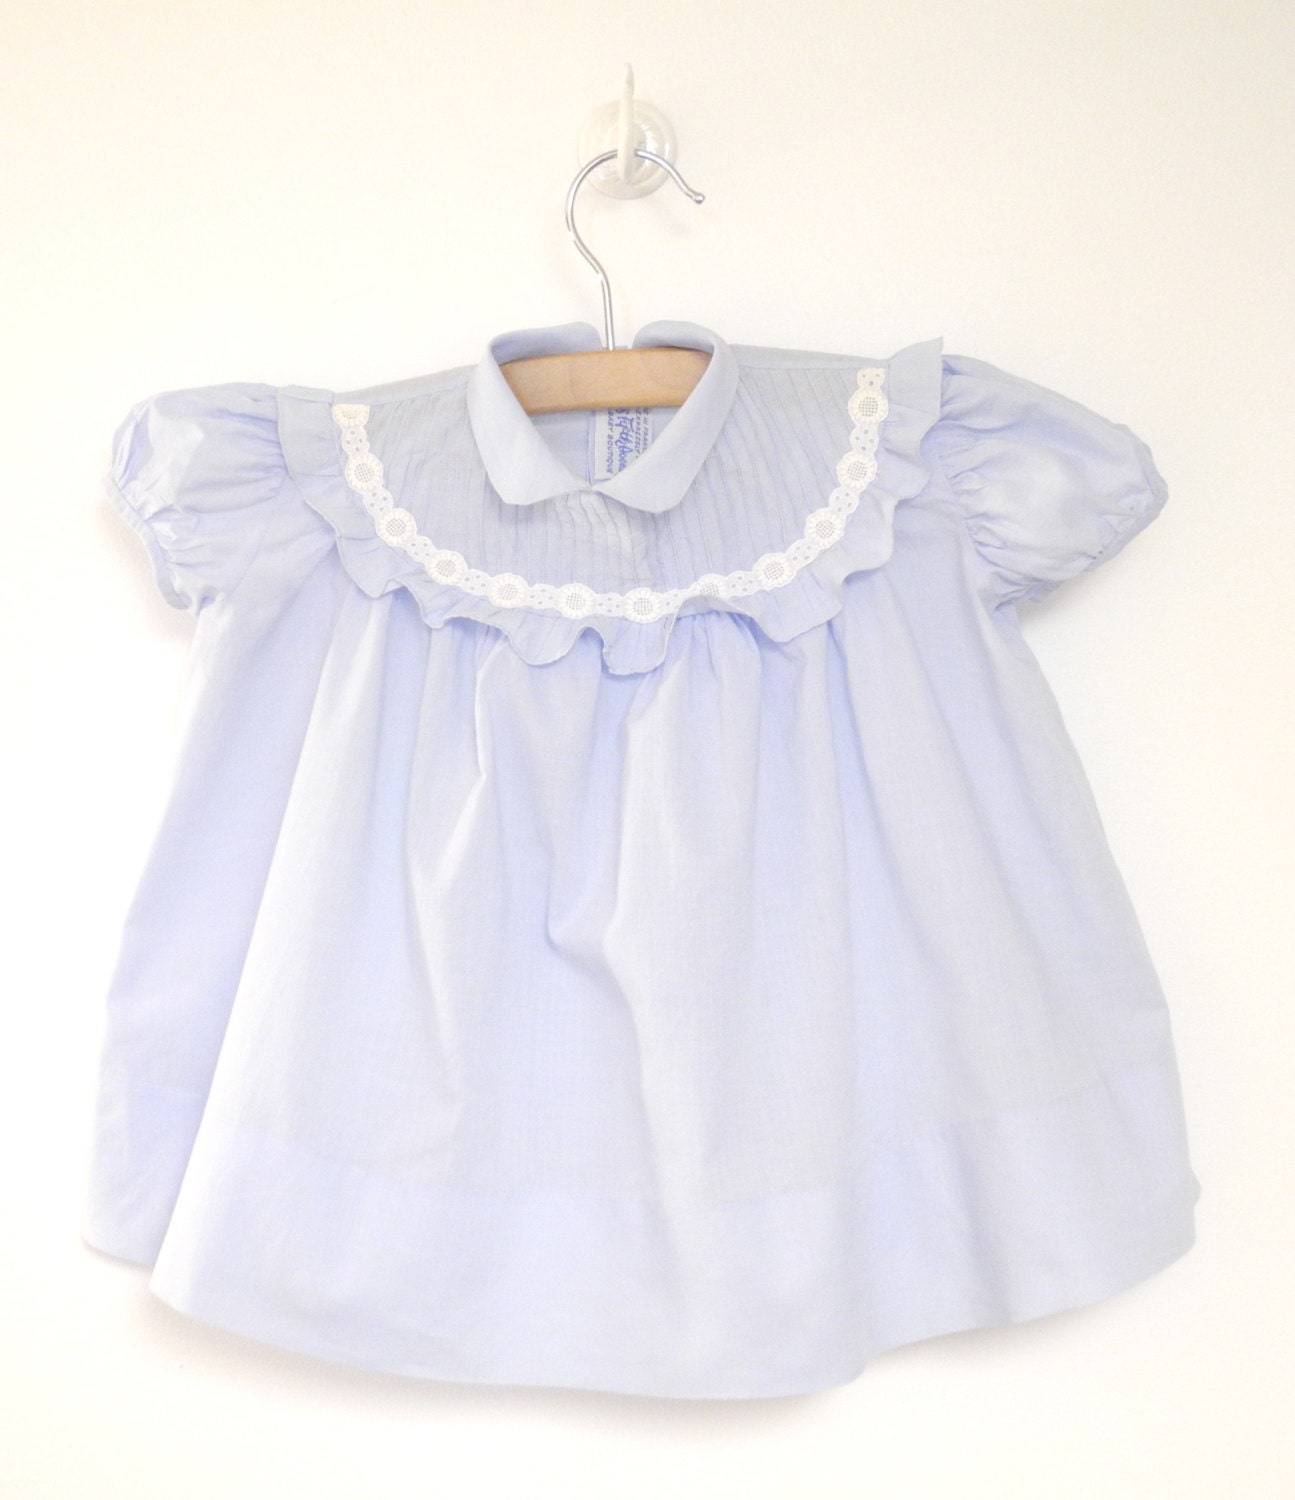 Vintage Baby Clothes 1950's Powder Blue and White by BabyTweeds